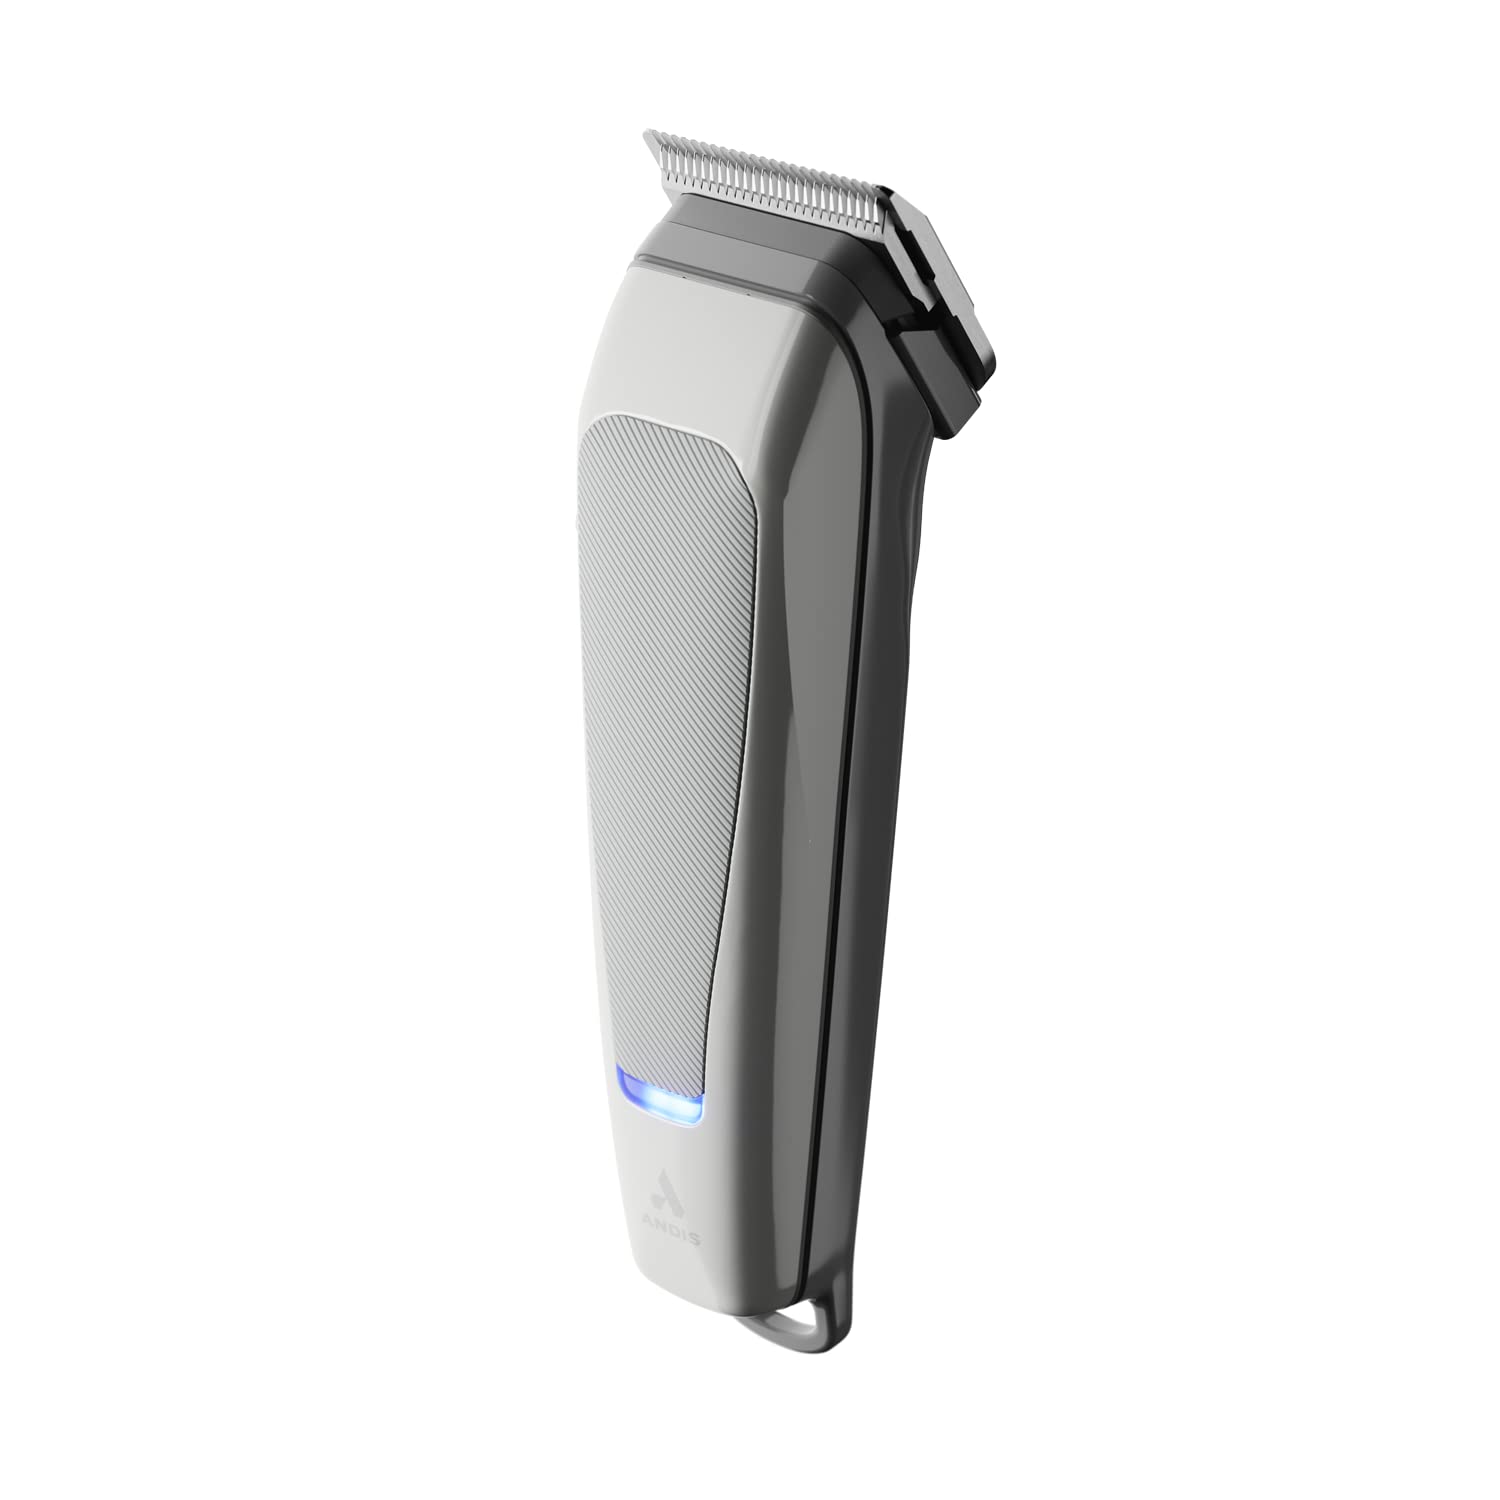 Andis 86100 reVITE Cordless Lithium-Ion Adjustable Taper Hair Cutting Clipper with Stainless Steel Blade - Gray